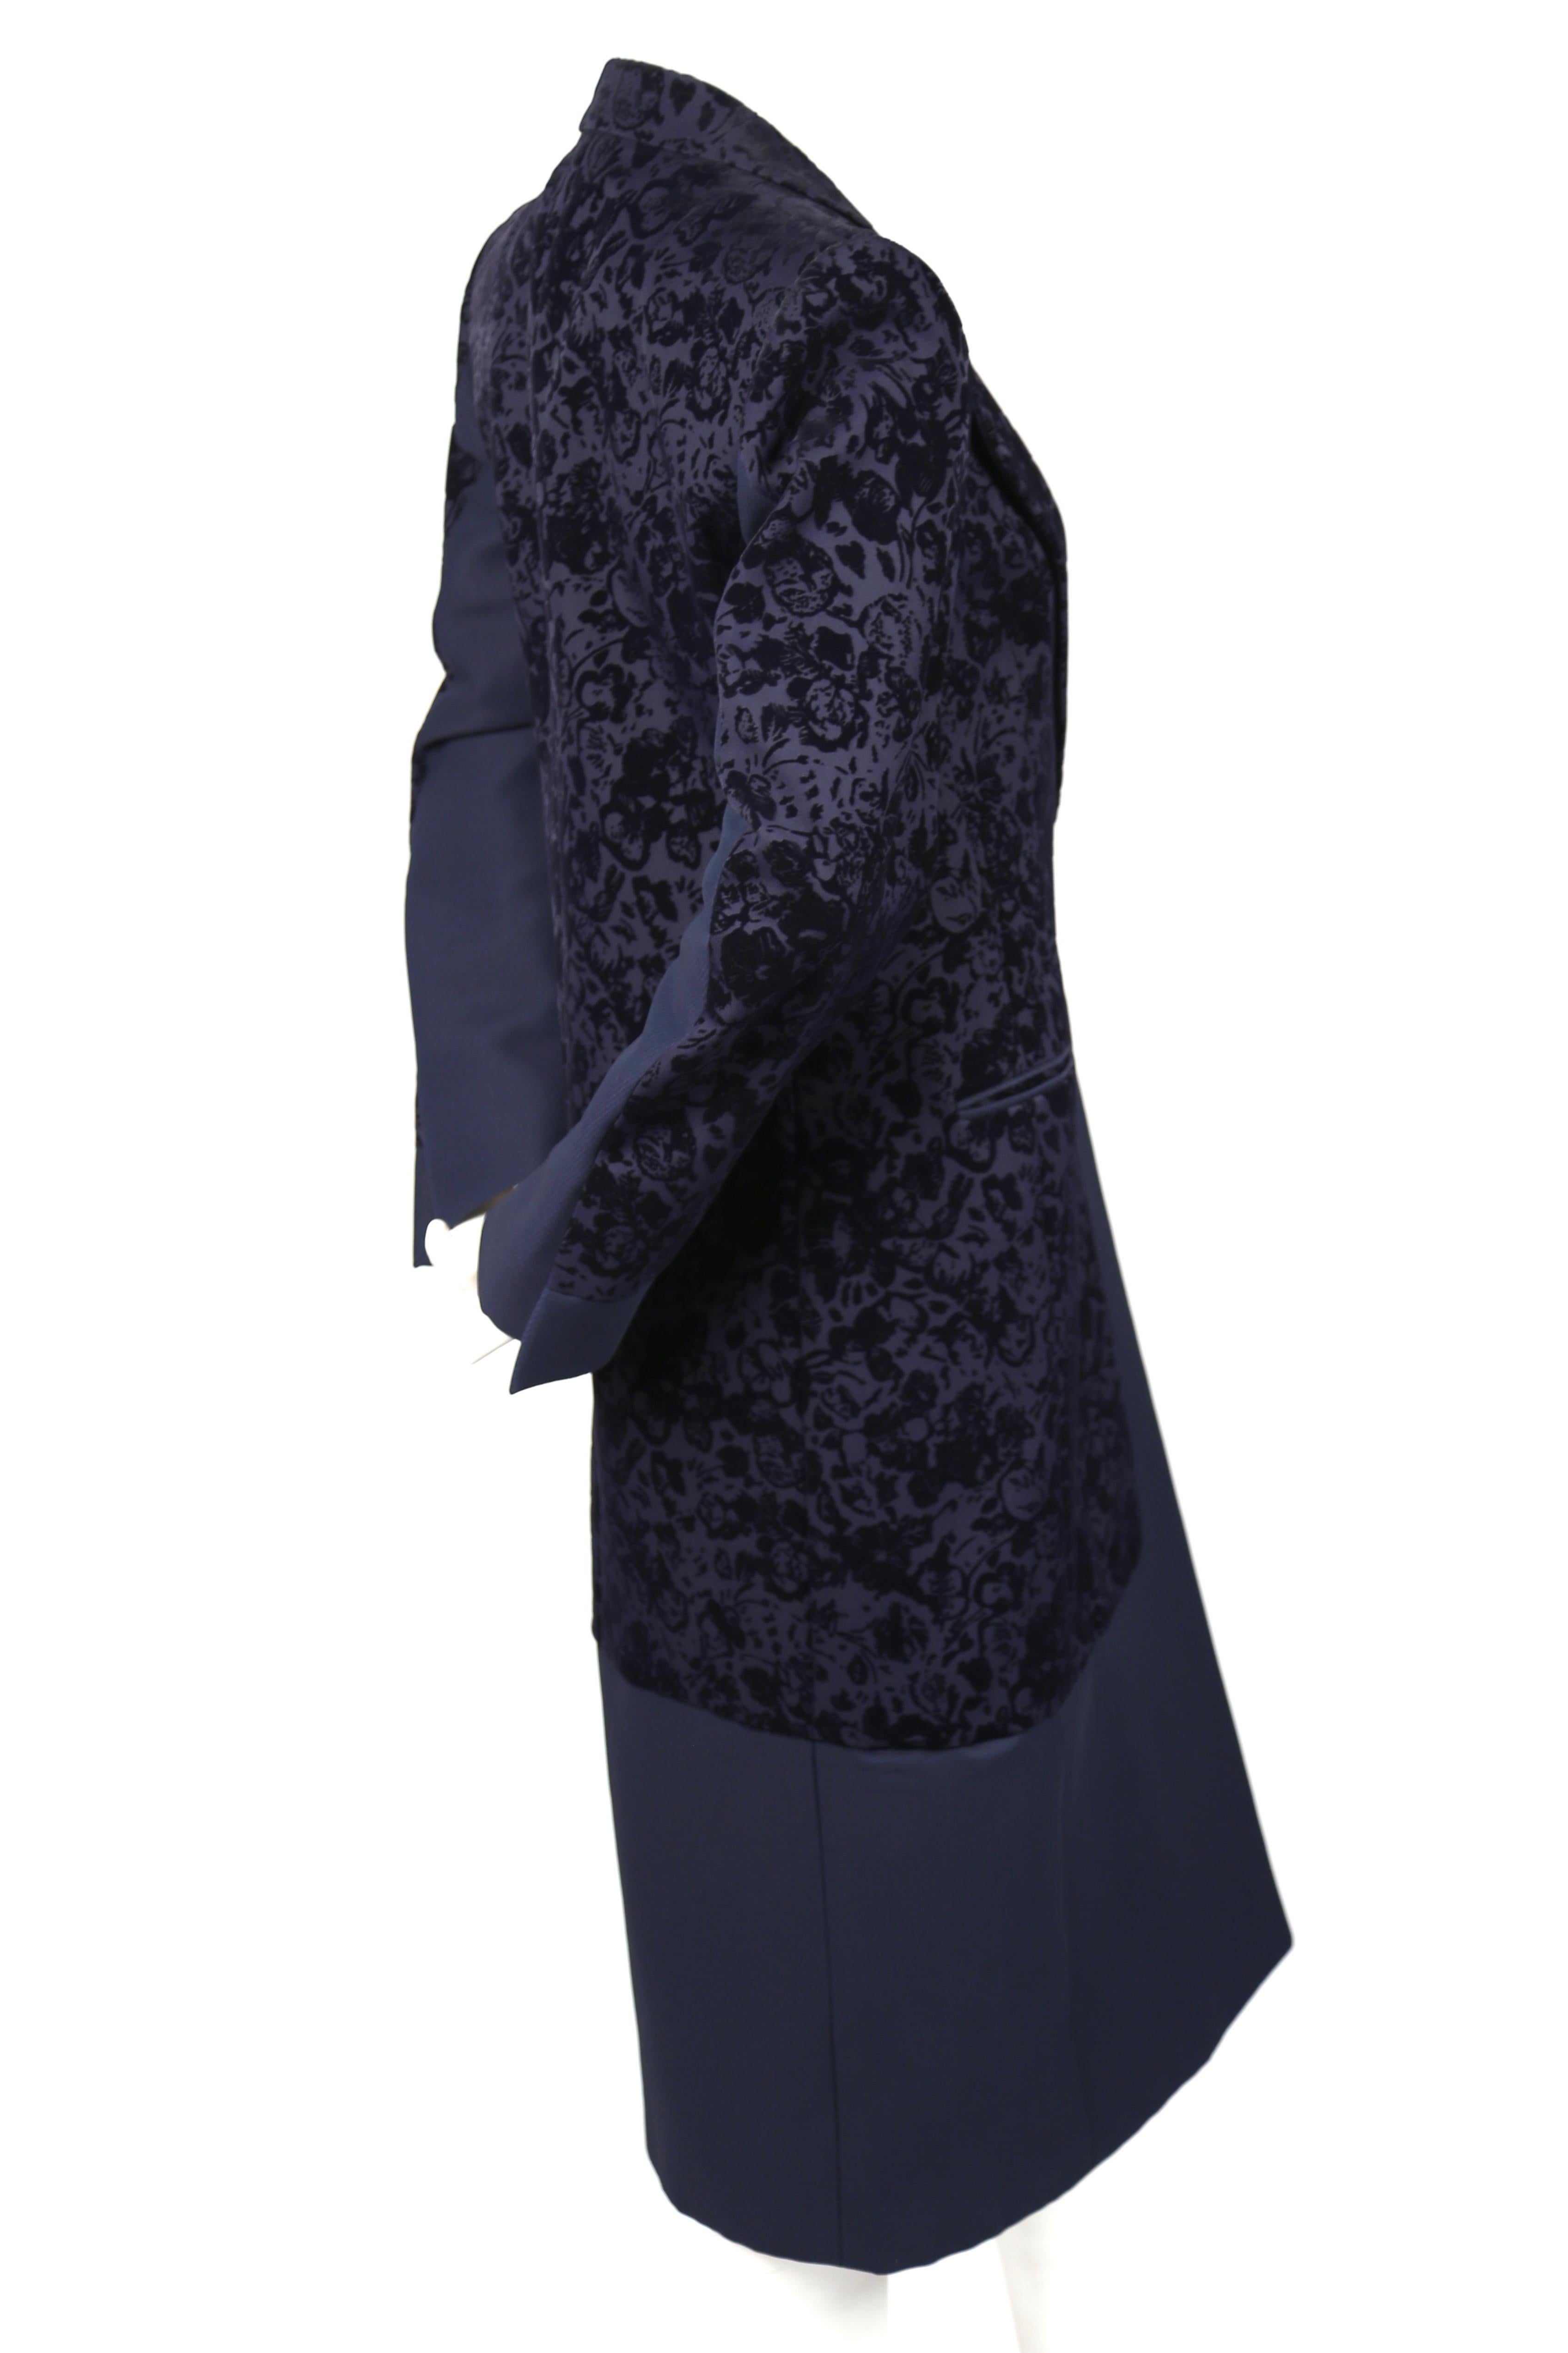 Navy blue, velvet flocked floral coat from Celine dating to the resort collection of 2013. French size 38. Approximate measurement: shoulder along top 15.25